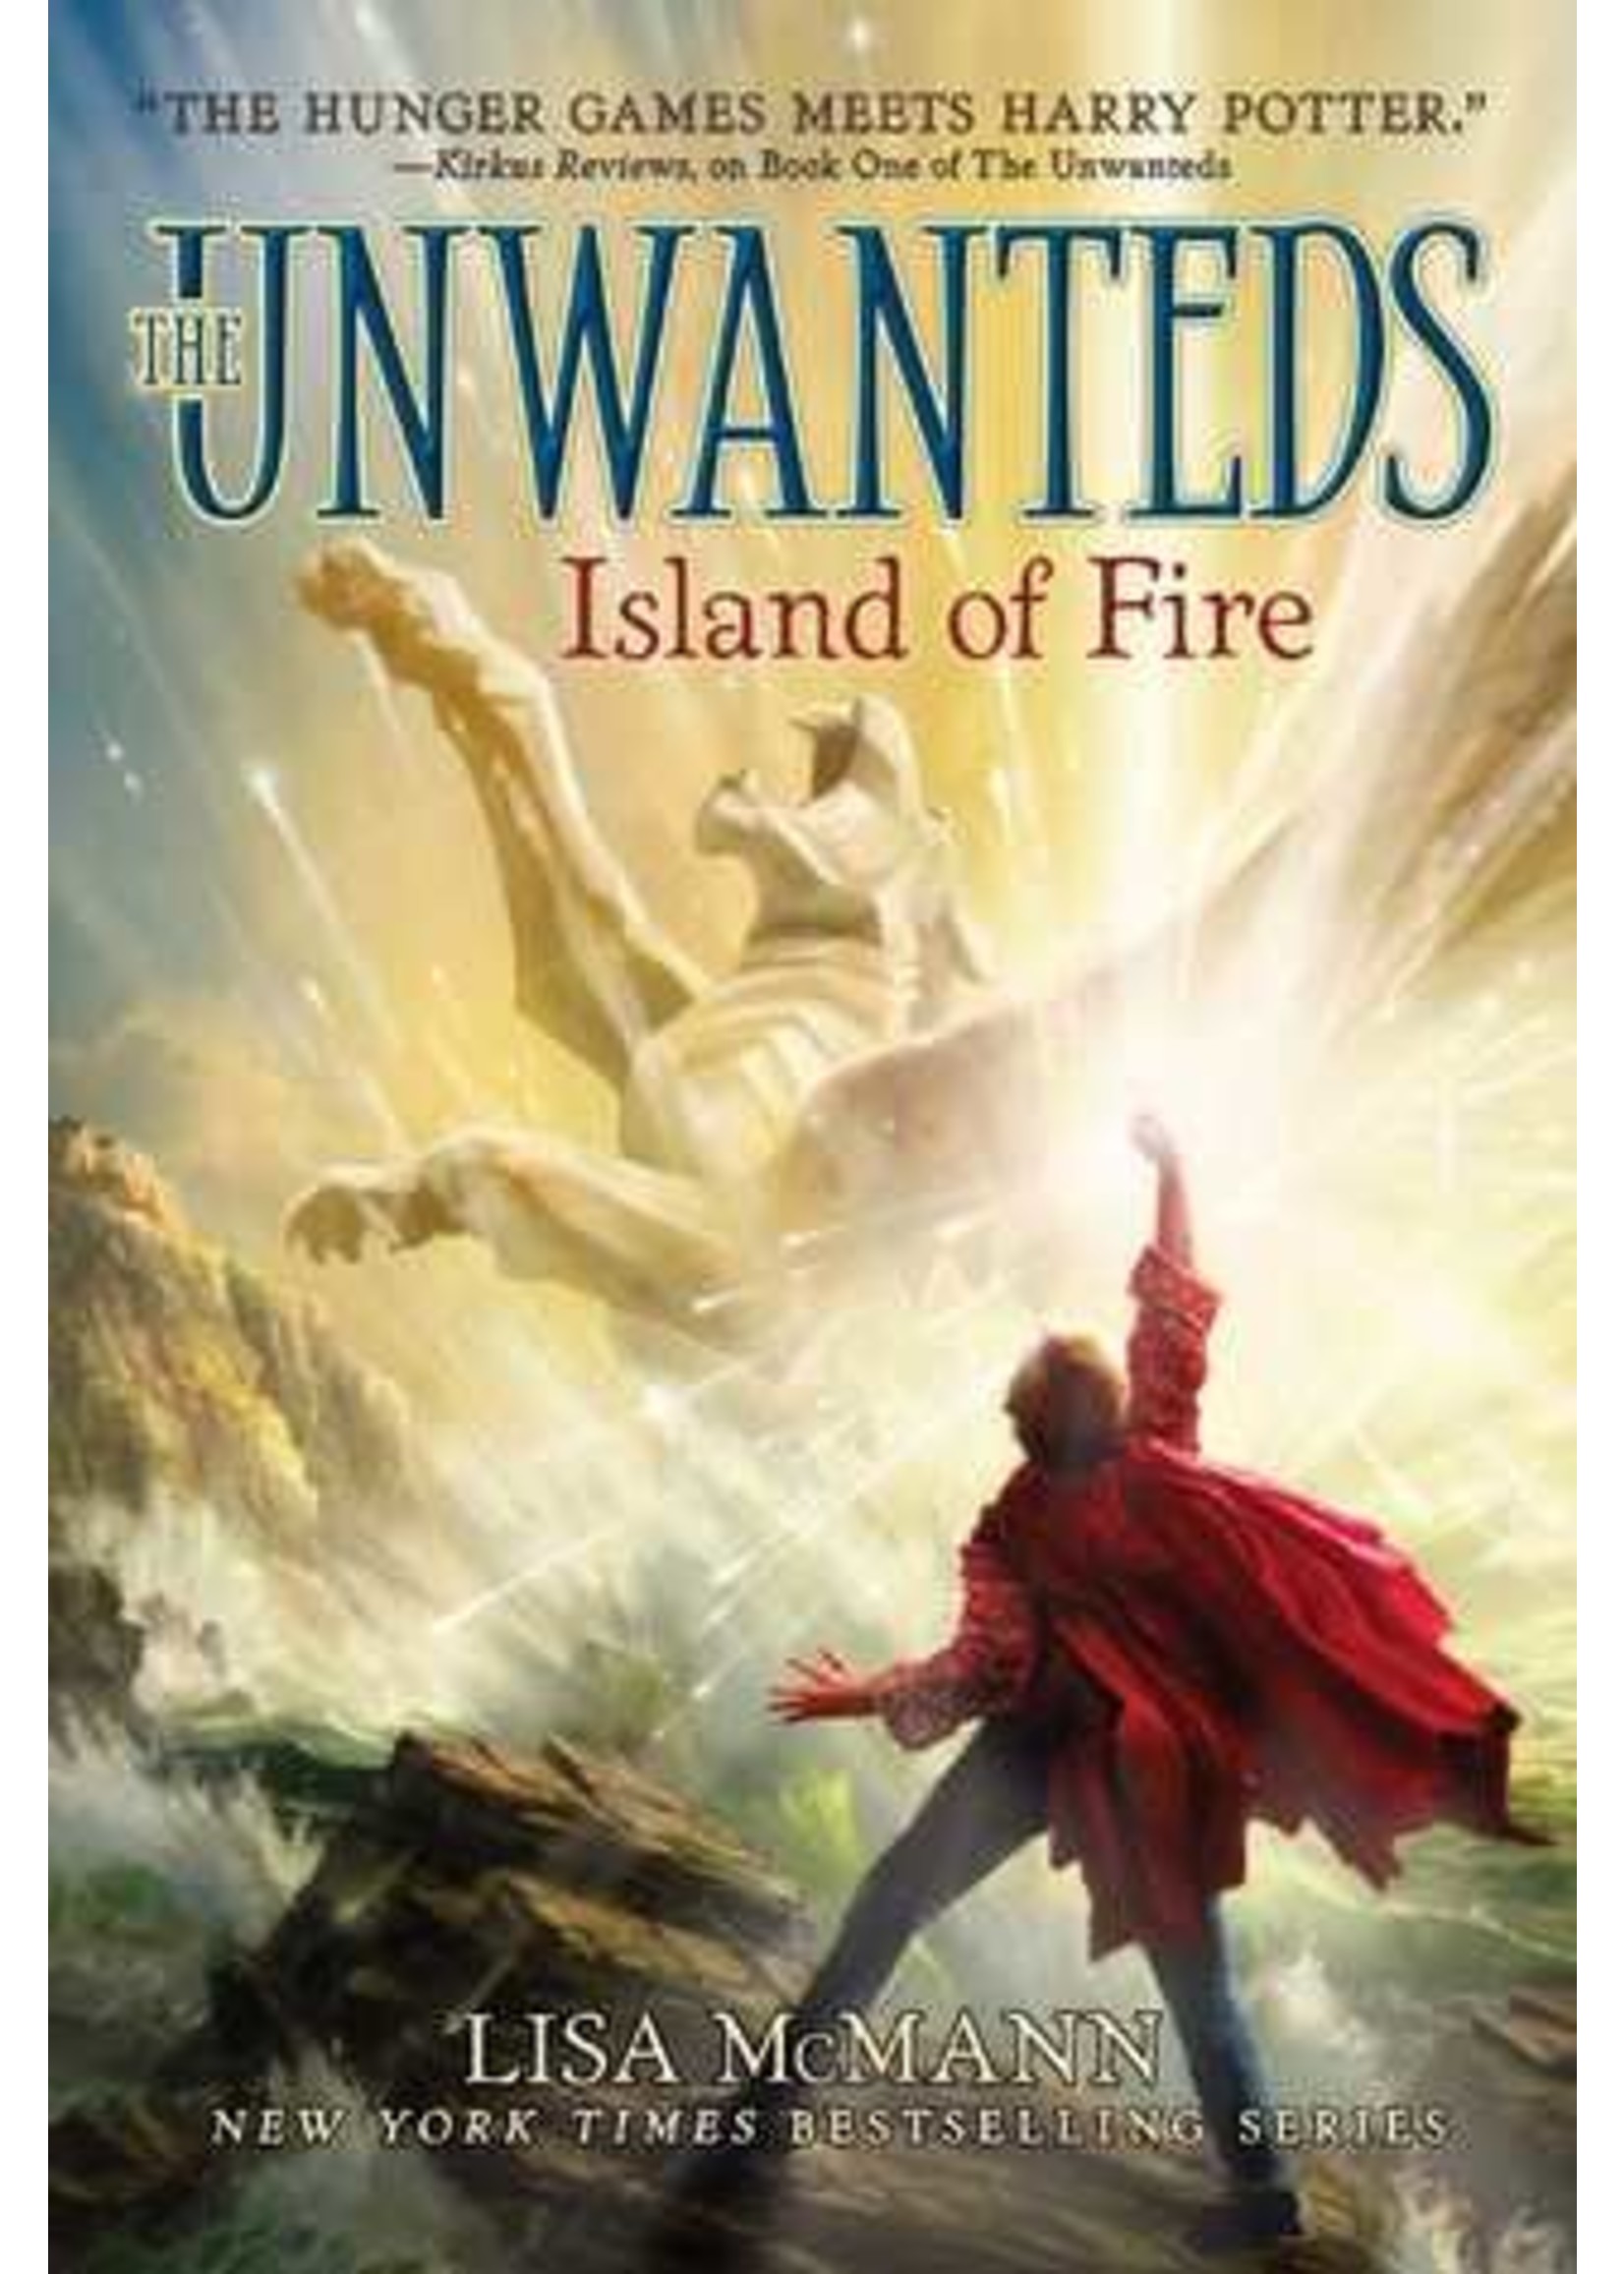 Island of Fire (Unwanteds #3) by Lisa McMann